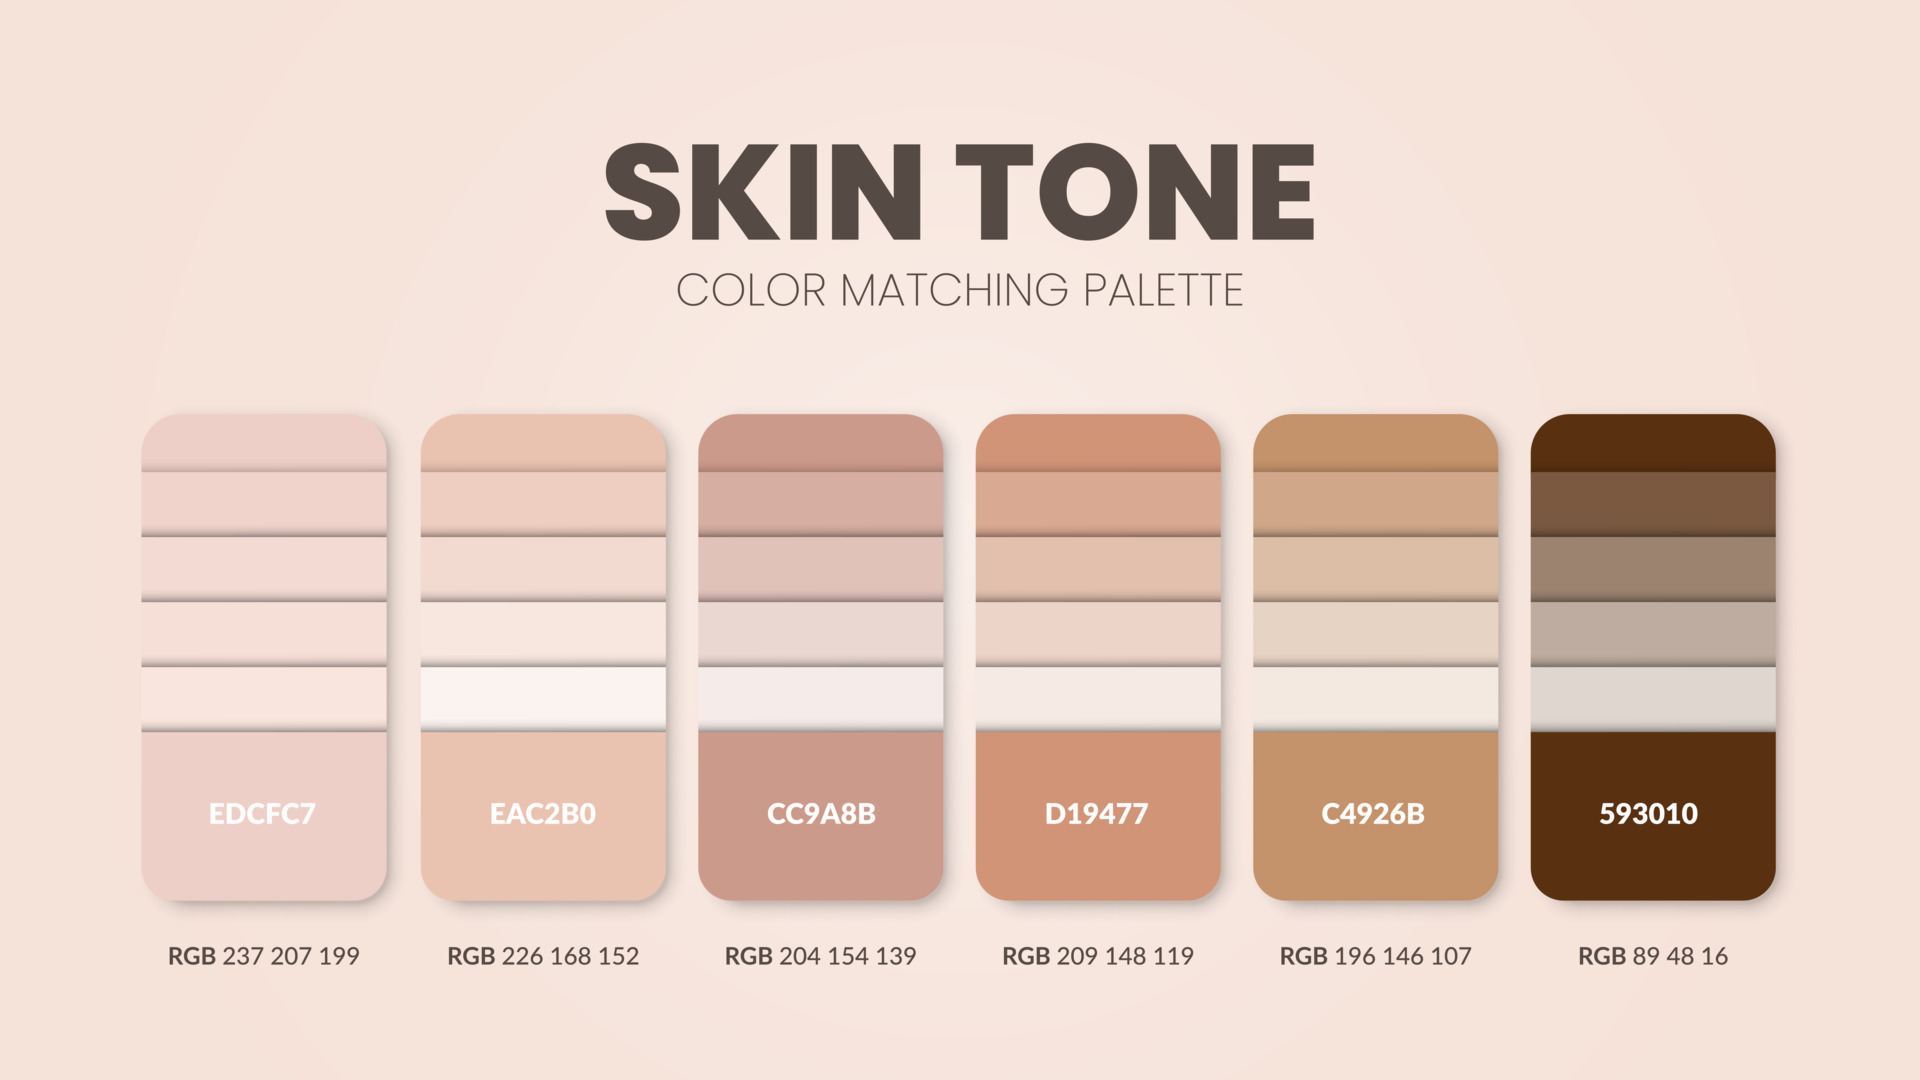 Skin tone theme color palettes or color schemes are trends